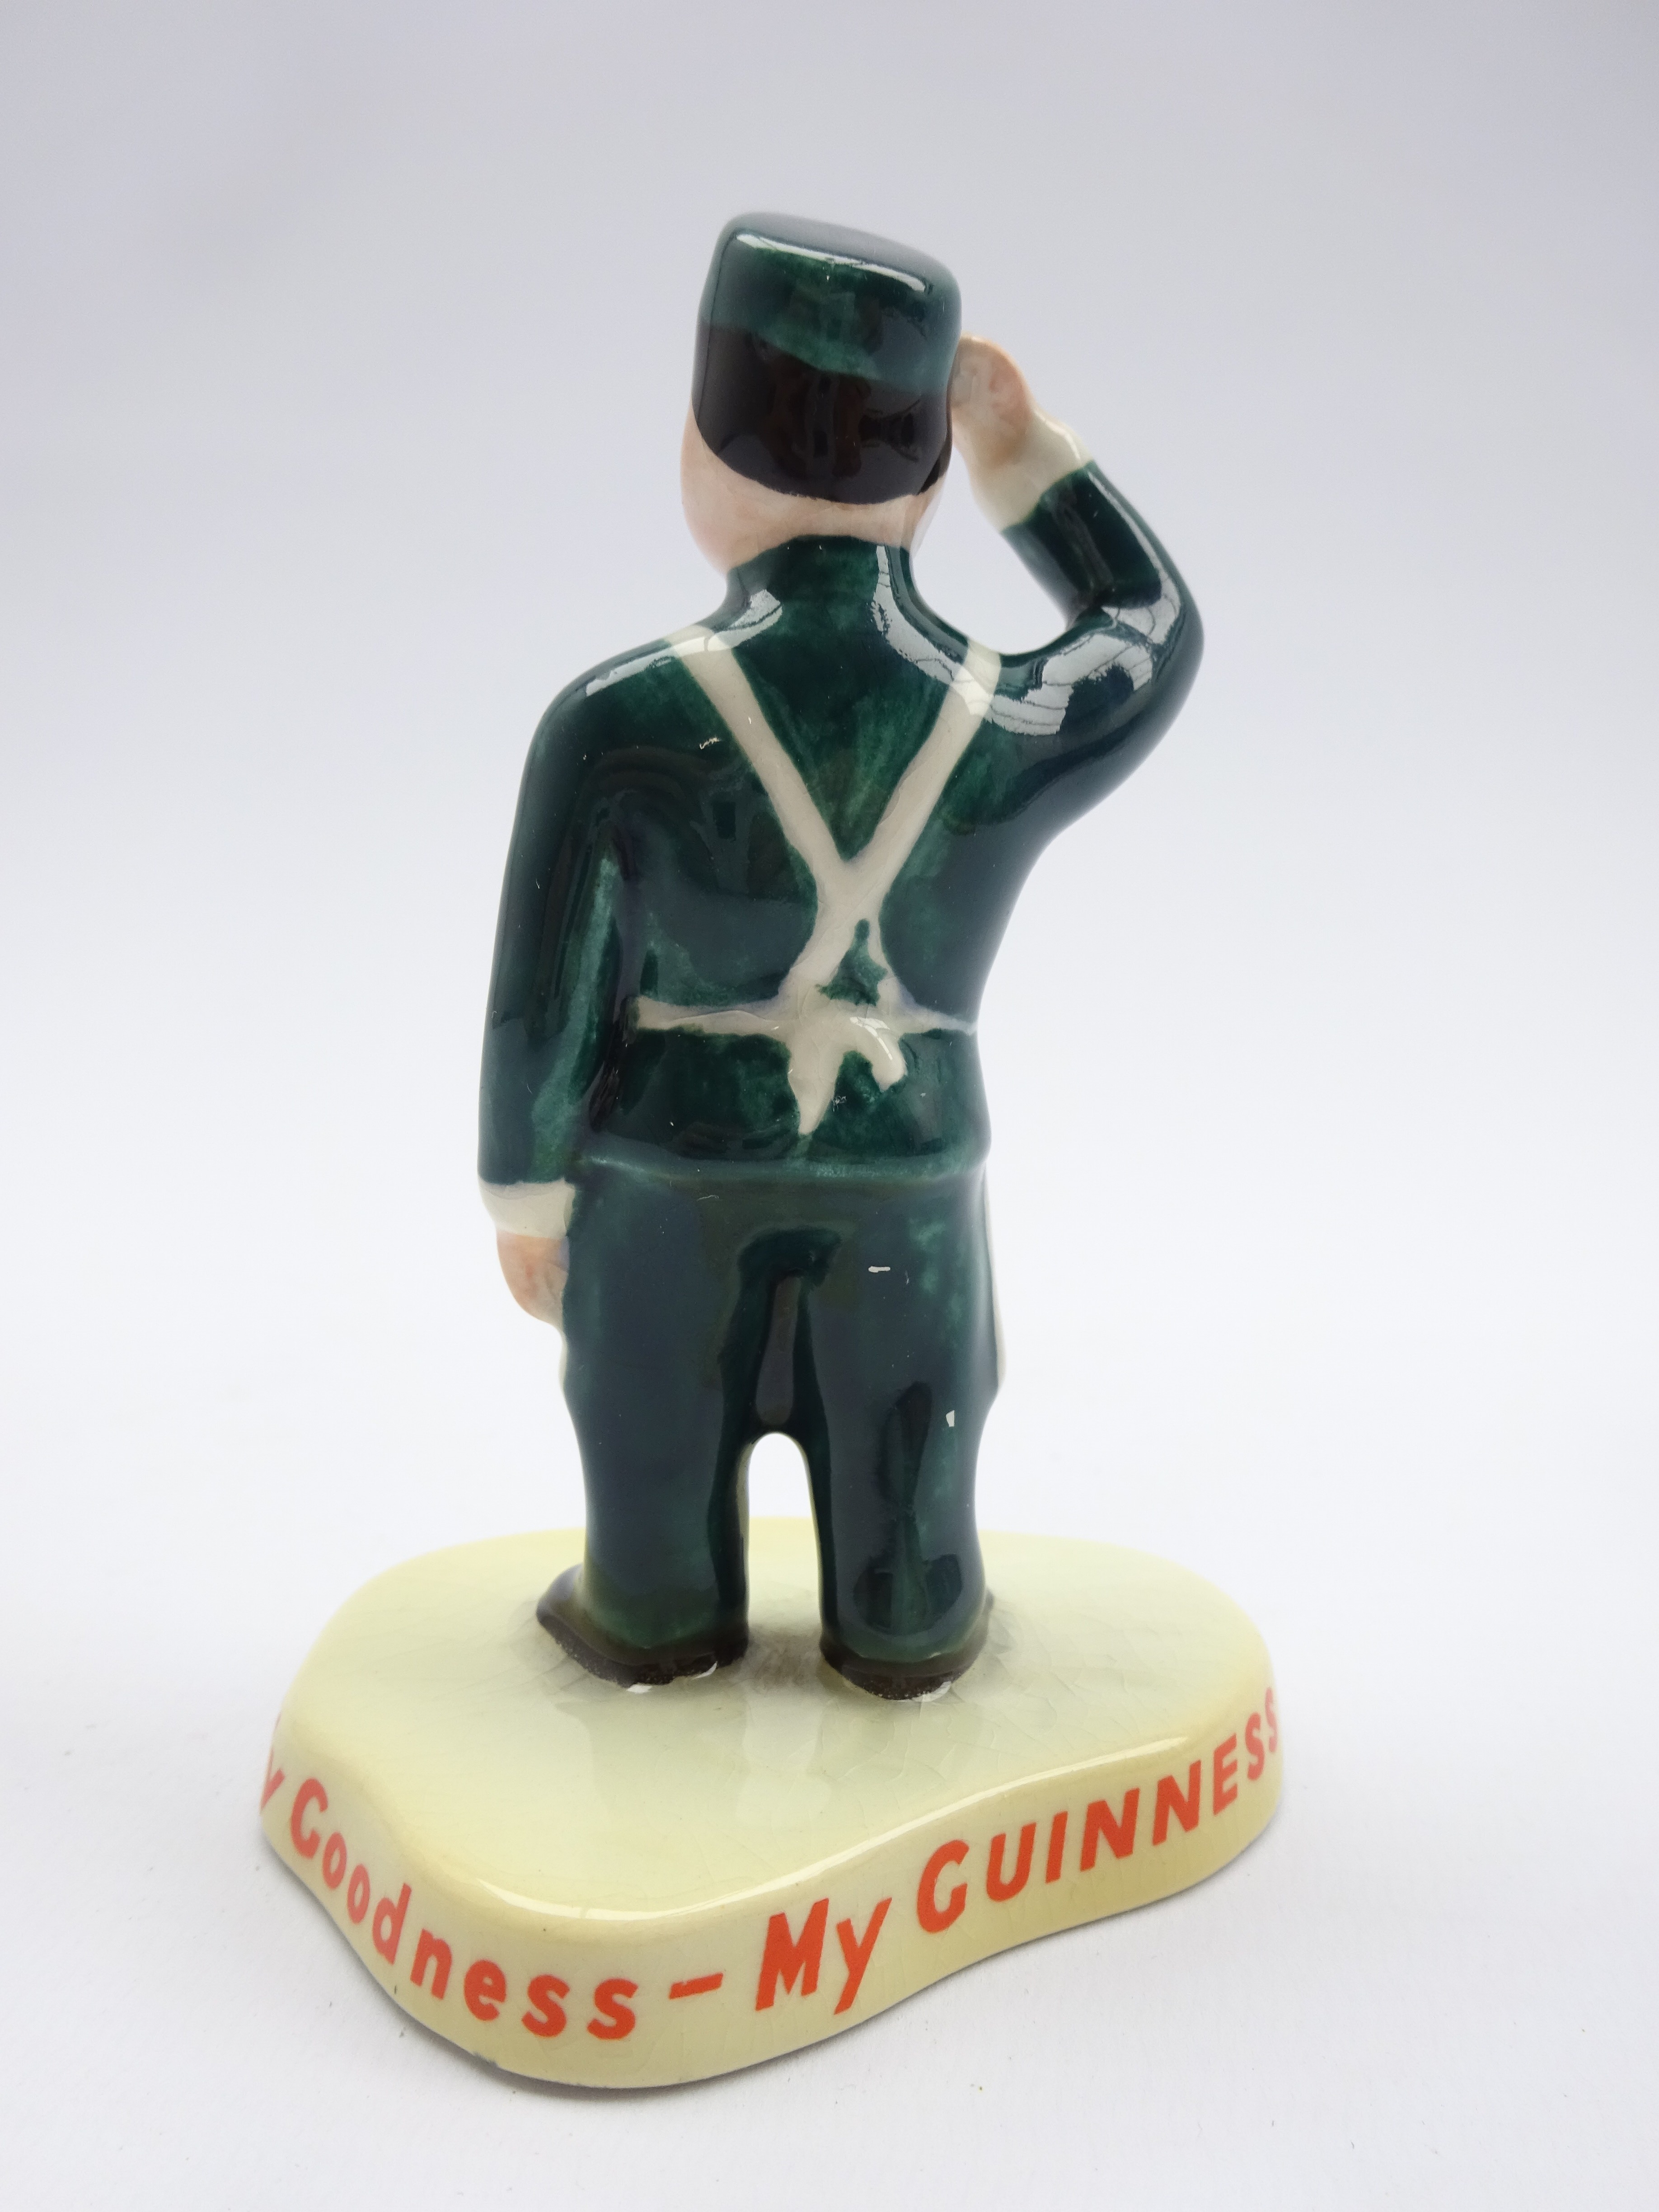 Carlton ware "Guinness" figure of the Zoo Keeper, - Image 2 of 3